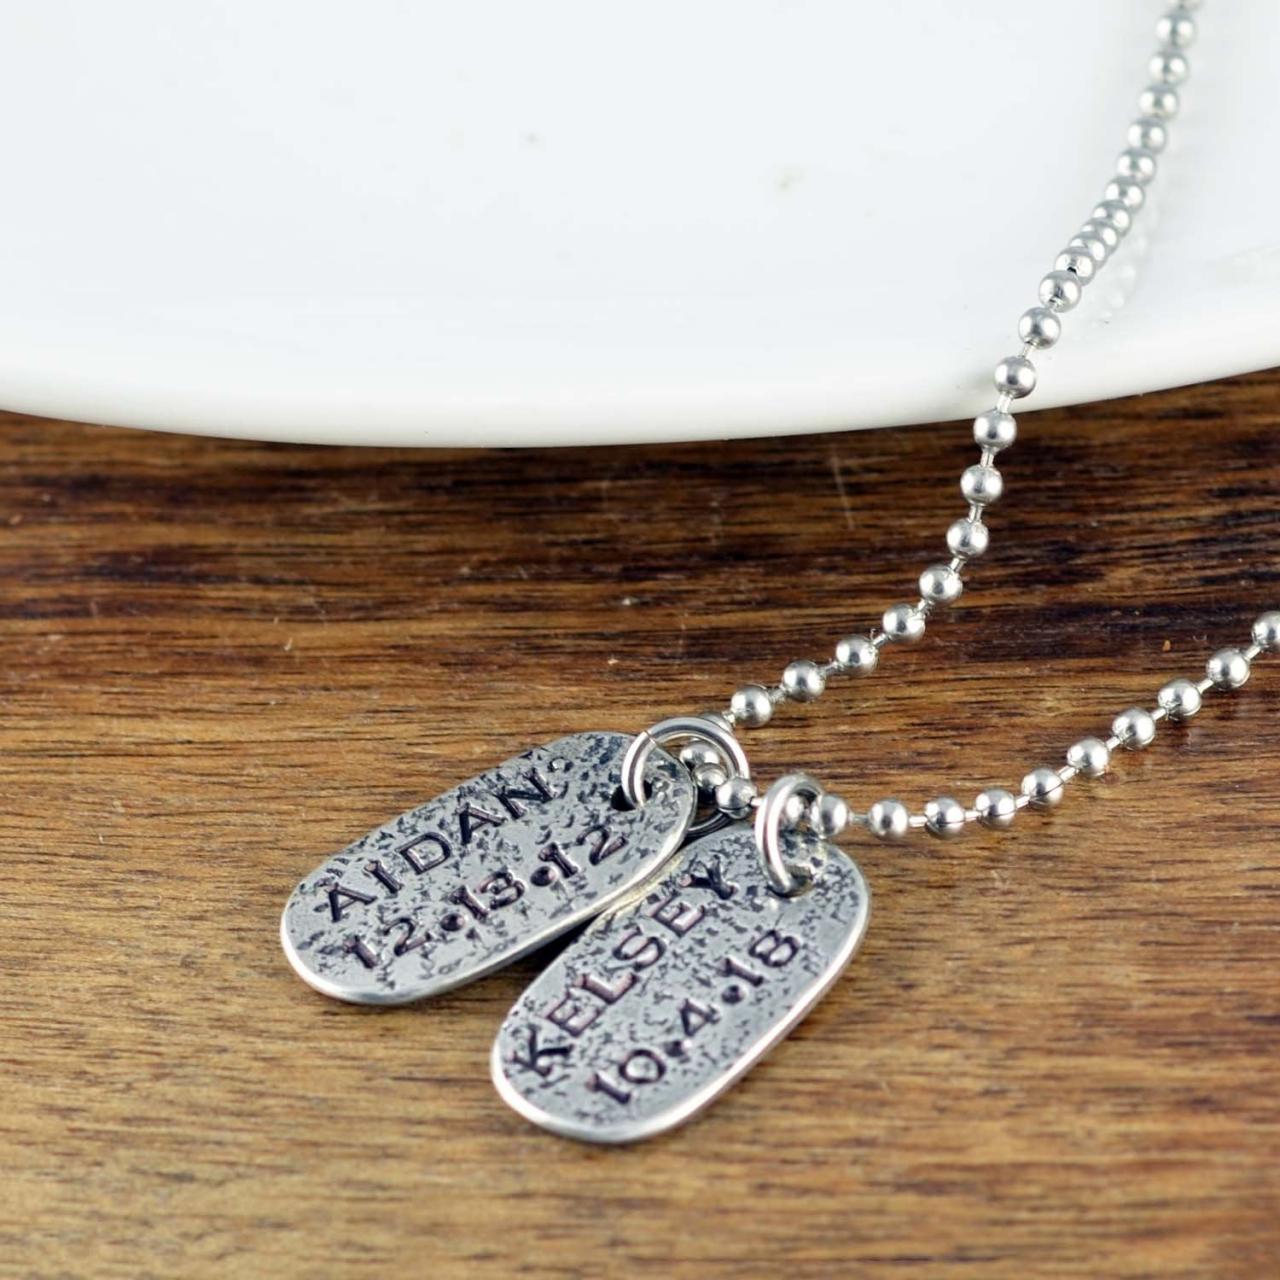 Personalized Mens Necklace, Dog Tag Necklace, Mens Jewelry, Mens Gift, Hand Stamped Necklace, Gift For Him, Gift For Dad, Fathers Day Gift